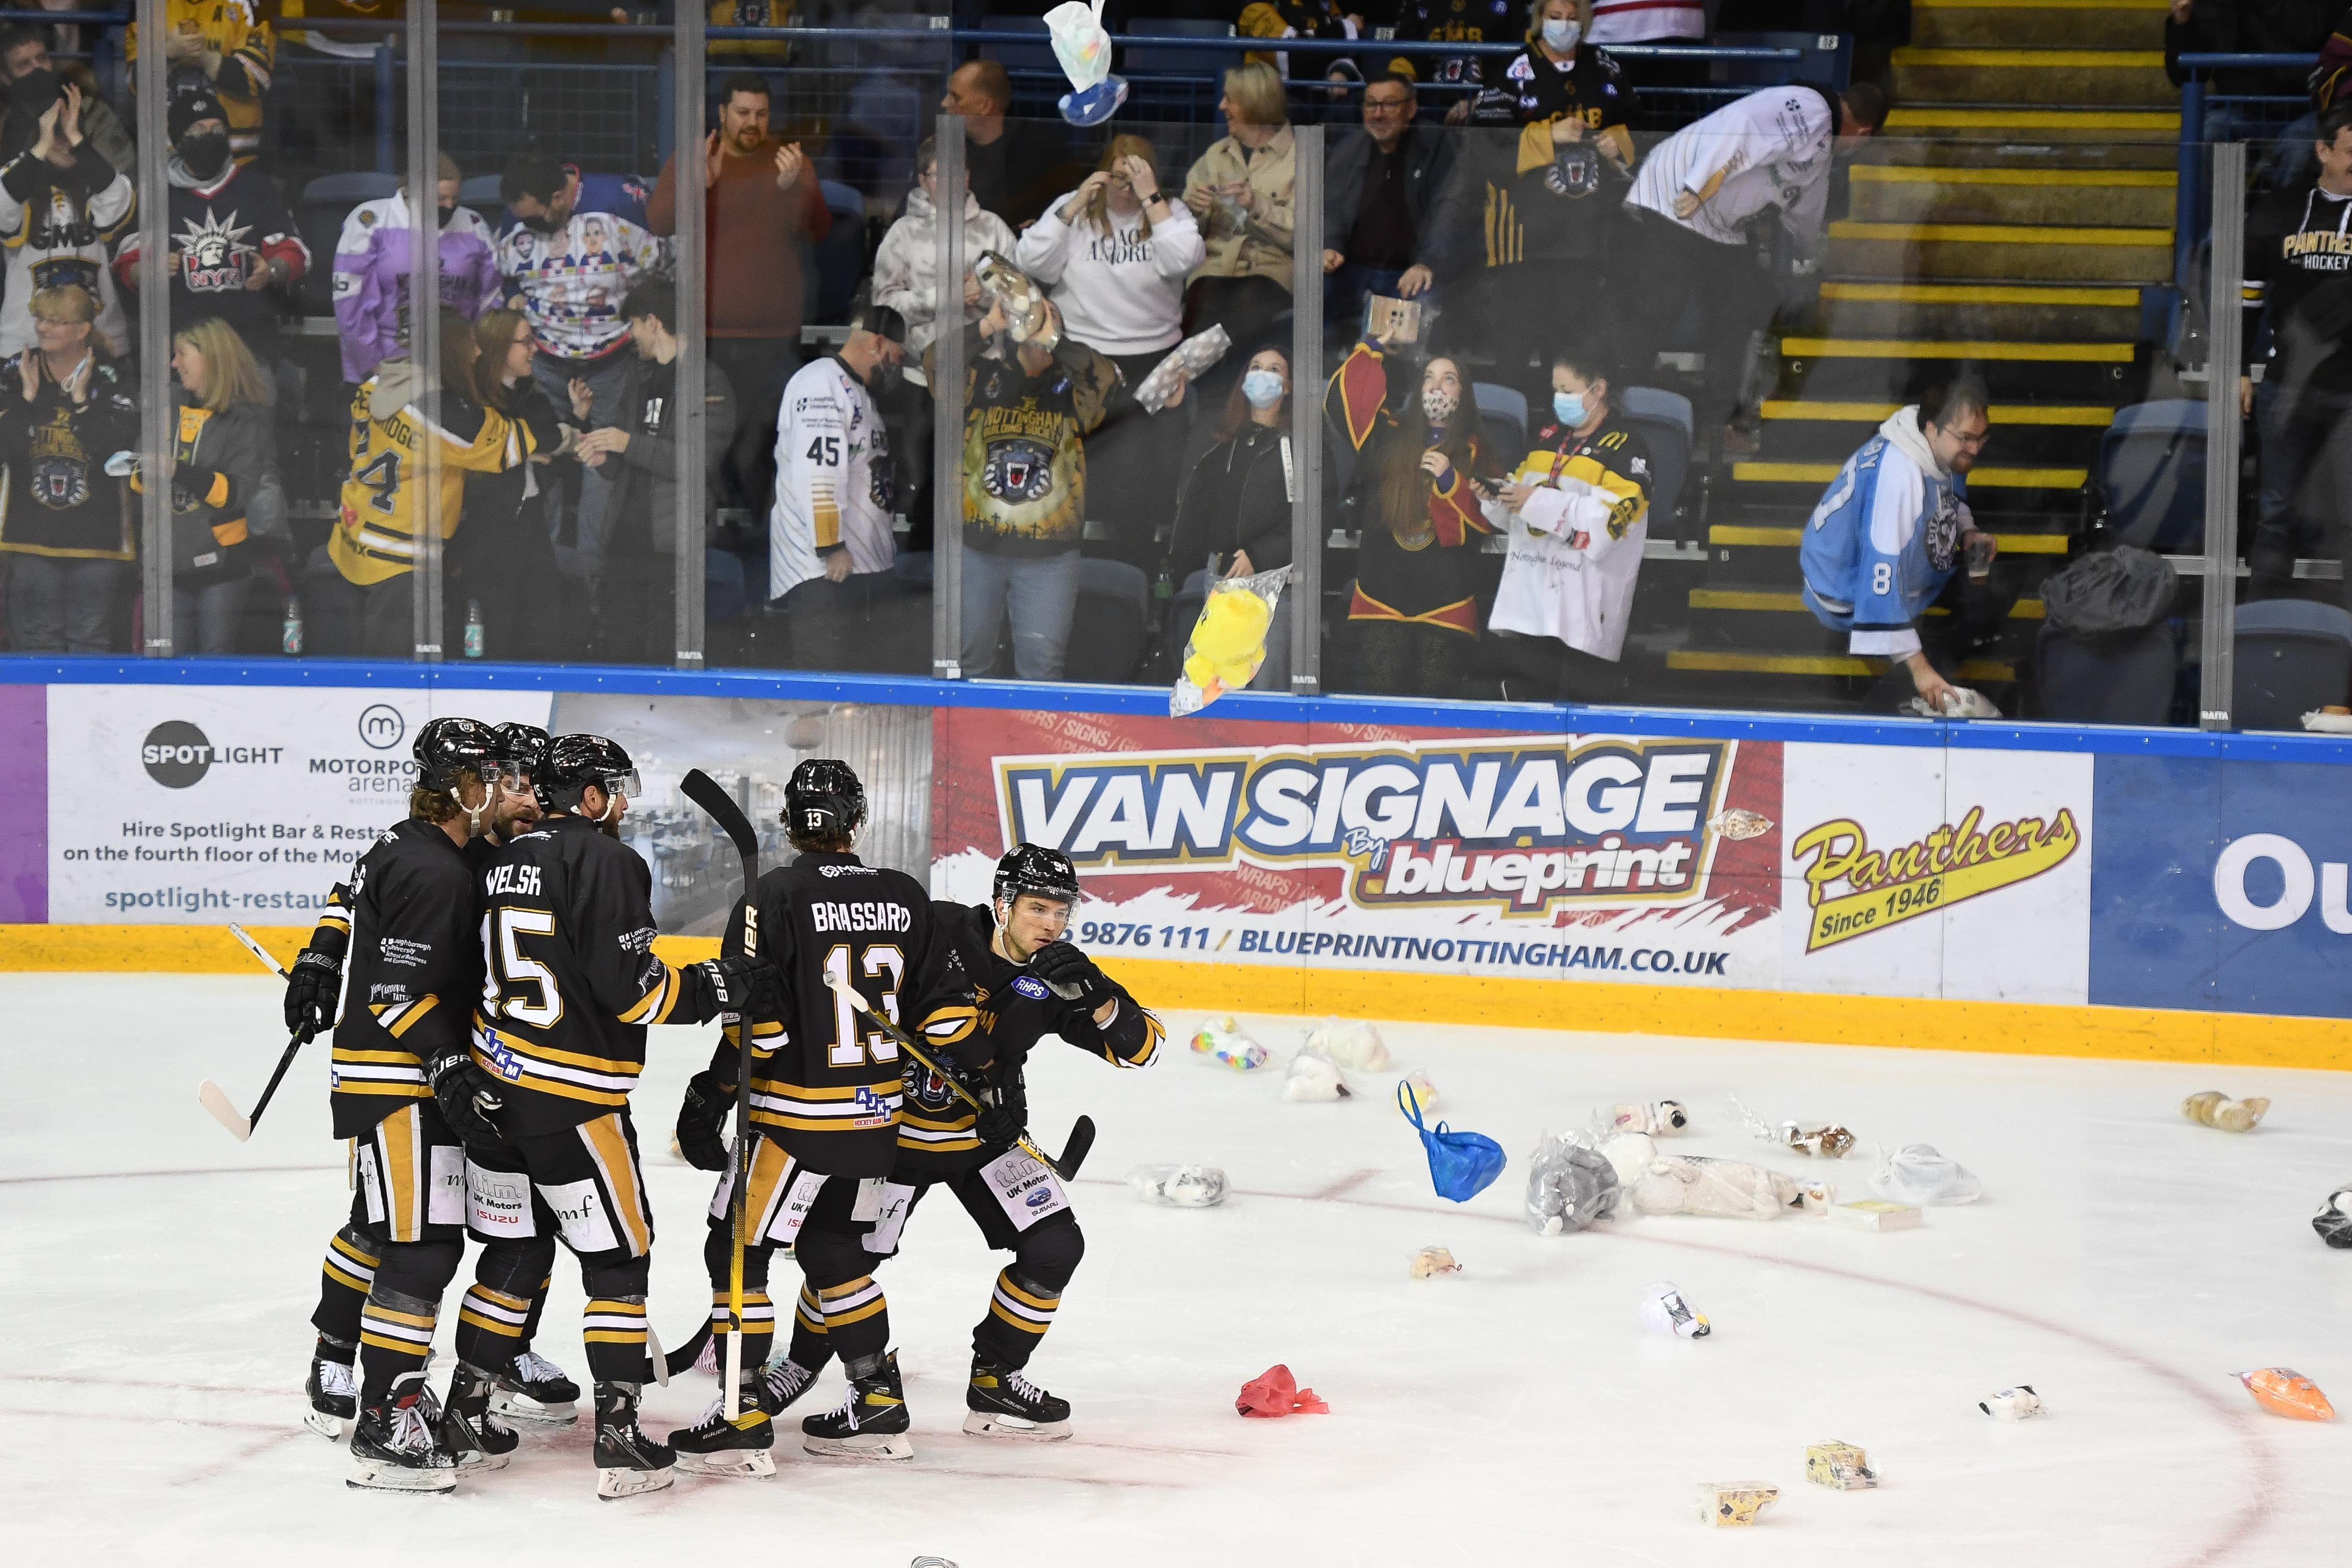 GET READY FOR THE TEDDY BEAR TOSS ON FRIDAY Top Image